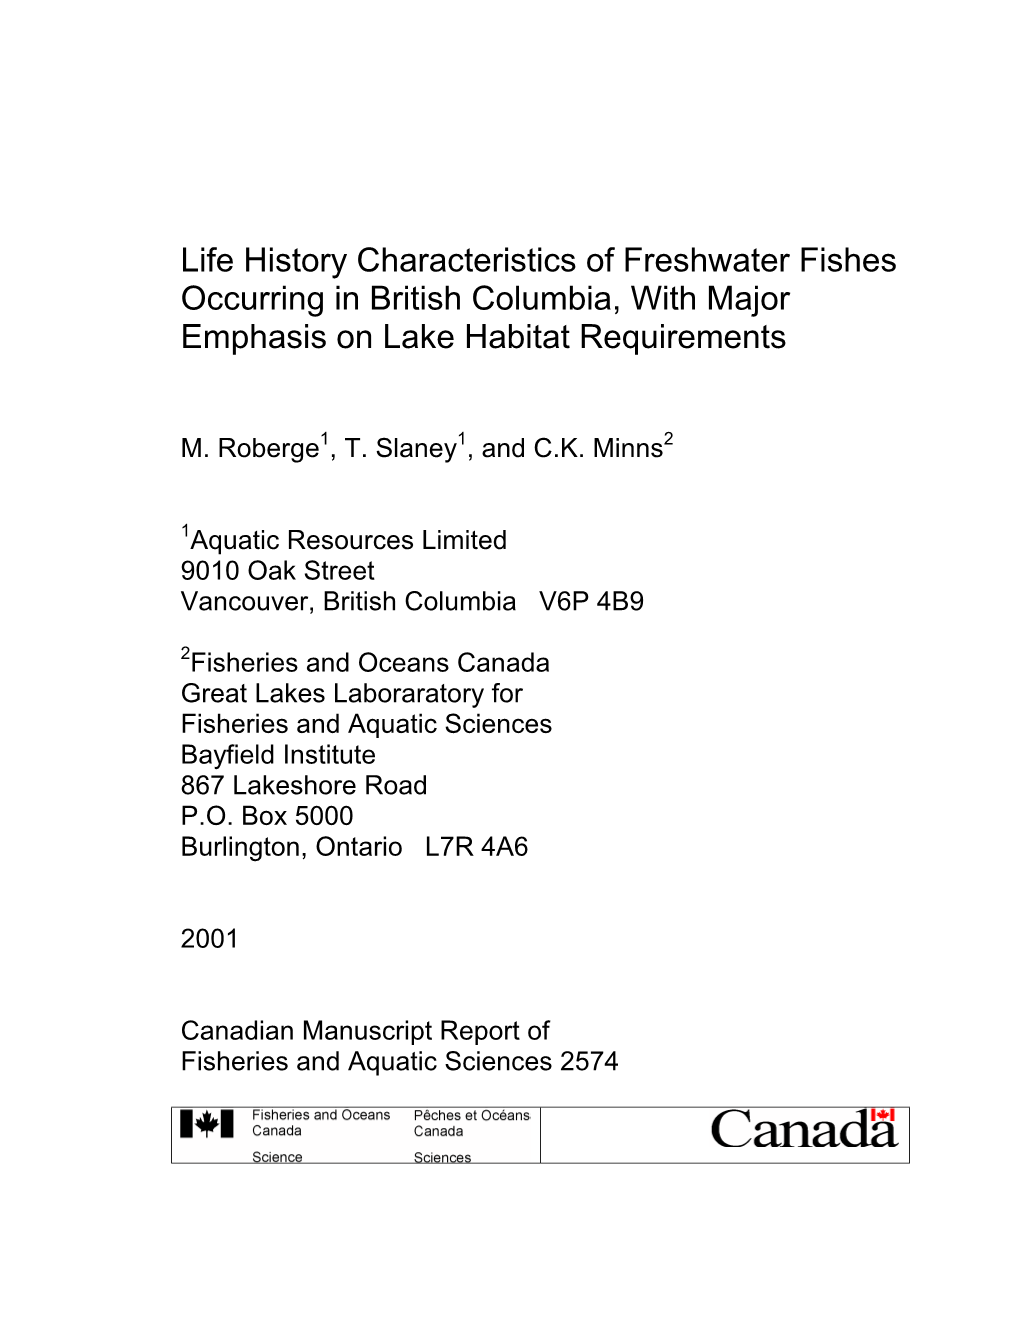 Life History Characteristics of Freshwater Fishes Occurring in British Columbia, with Major Emphasis on Lake Habitat Requirements